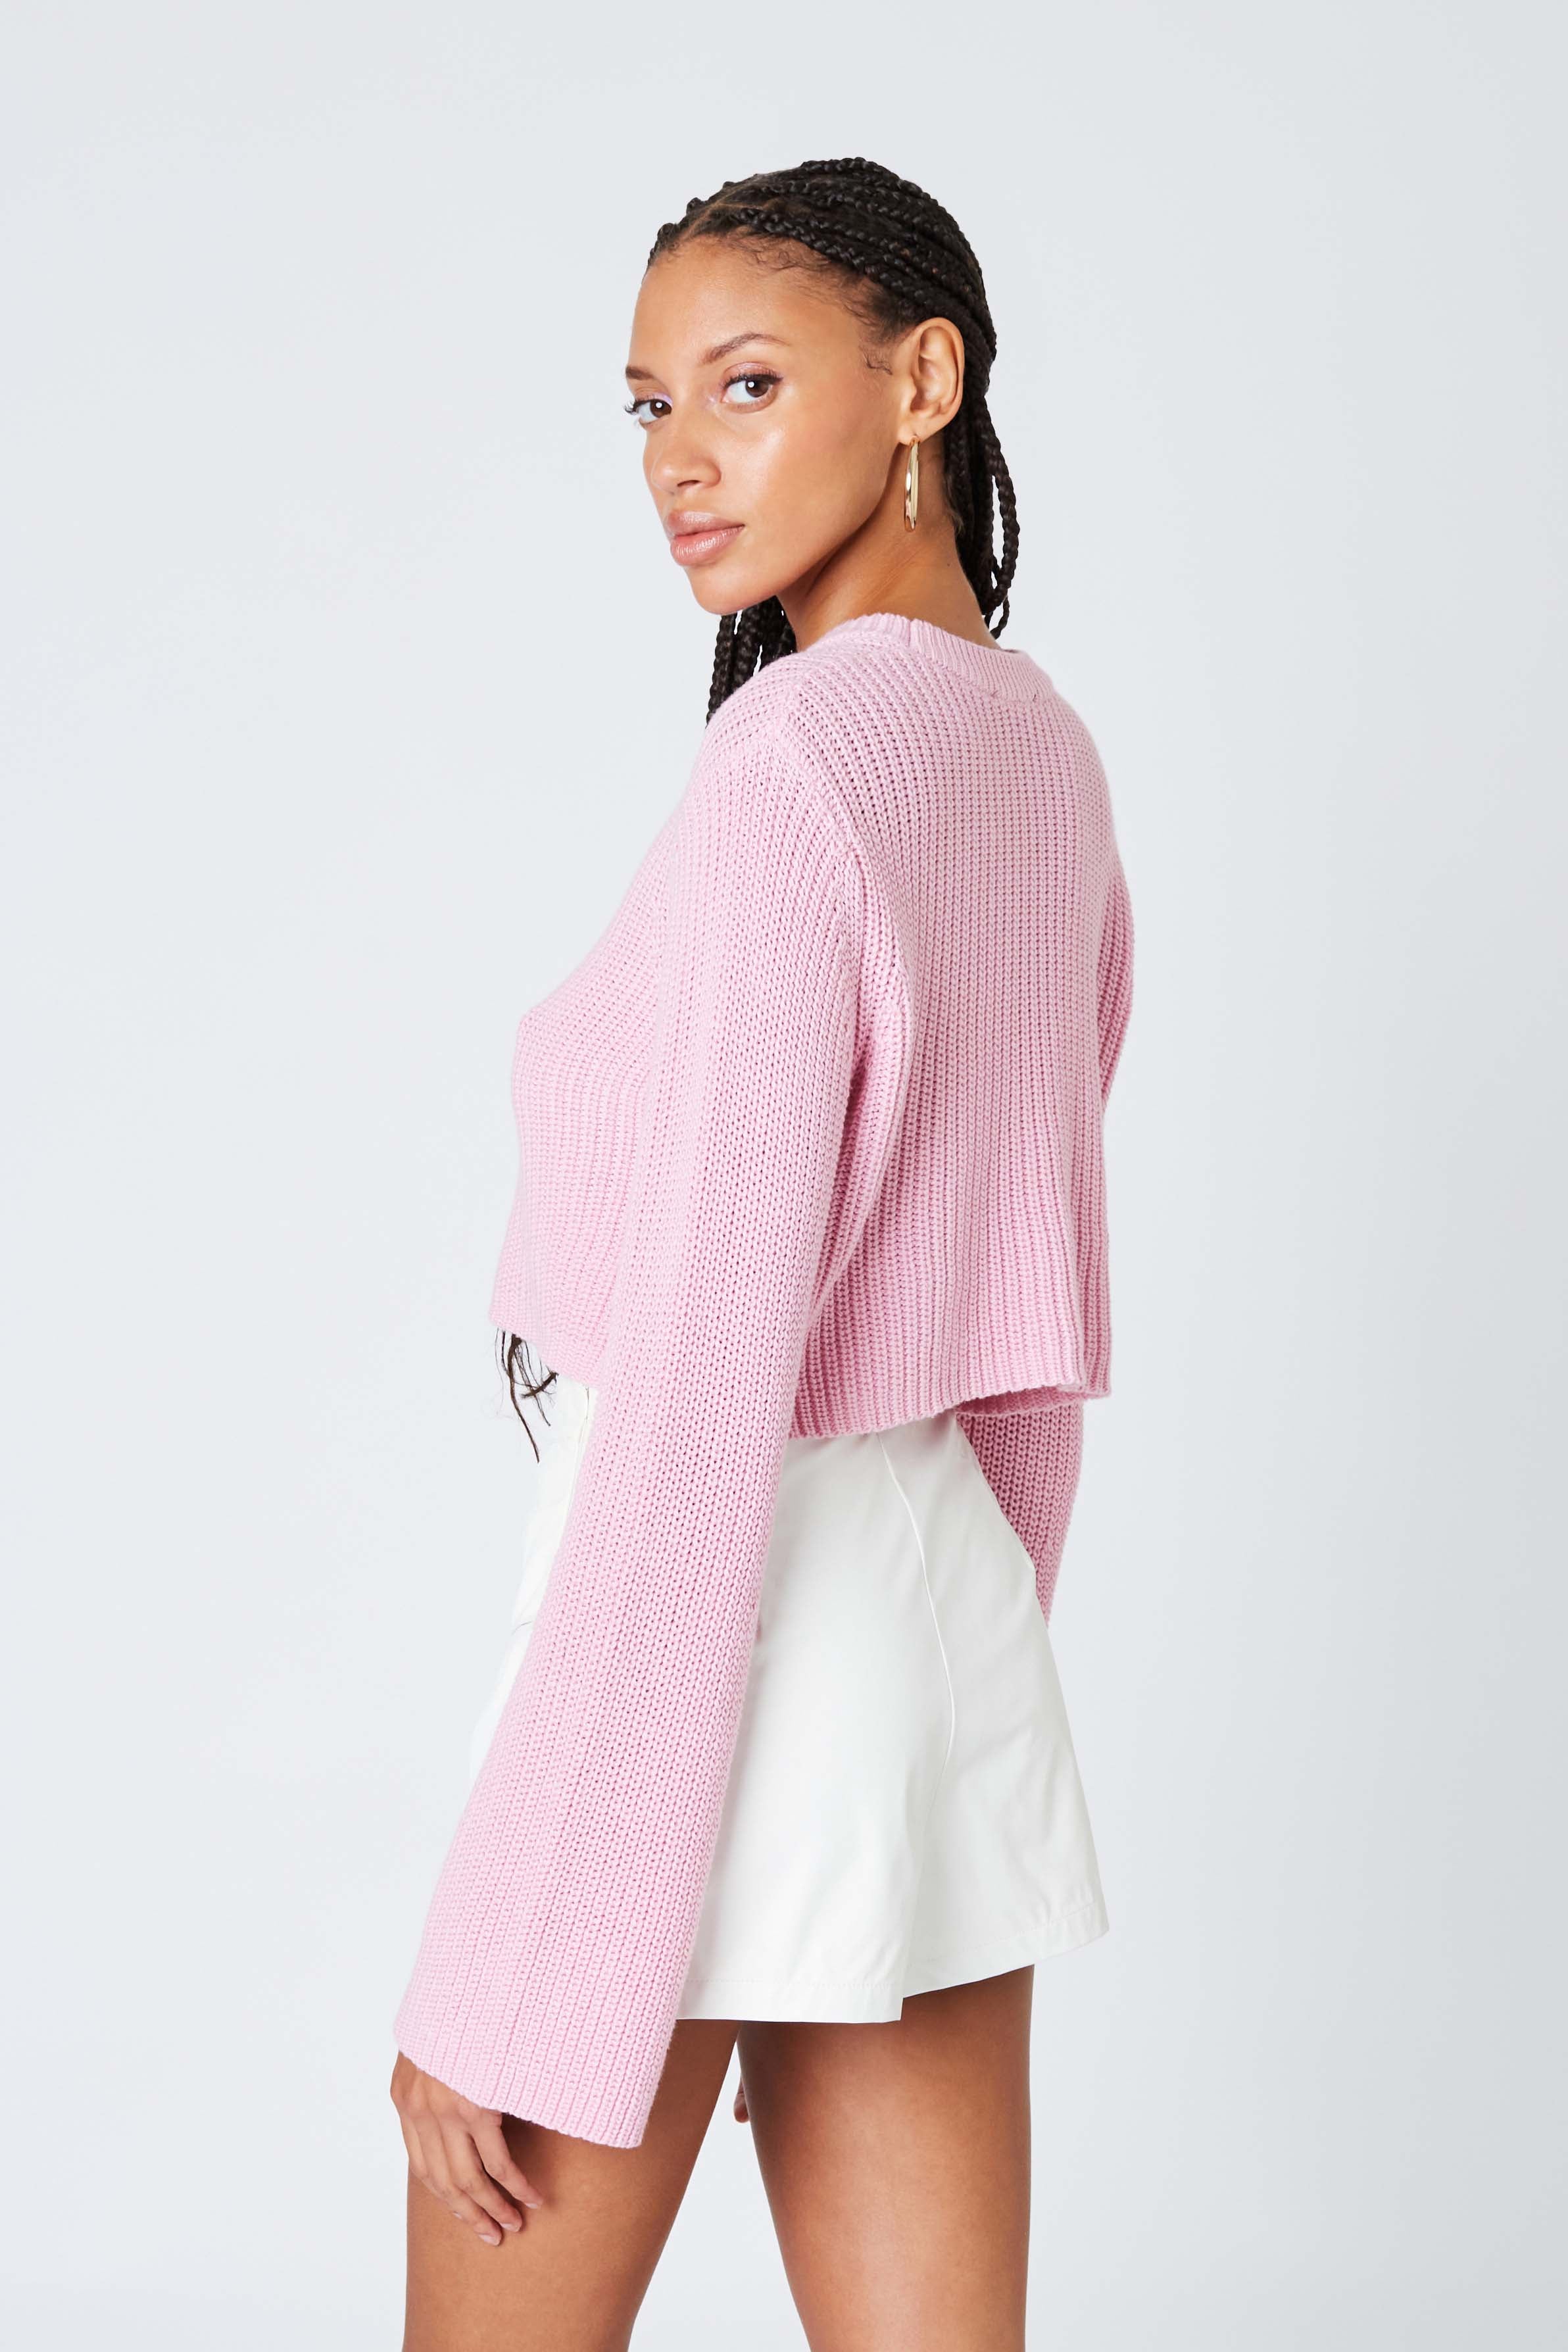 Cropped Crewneck Sweater in Petal Pink Back View